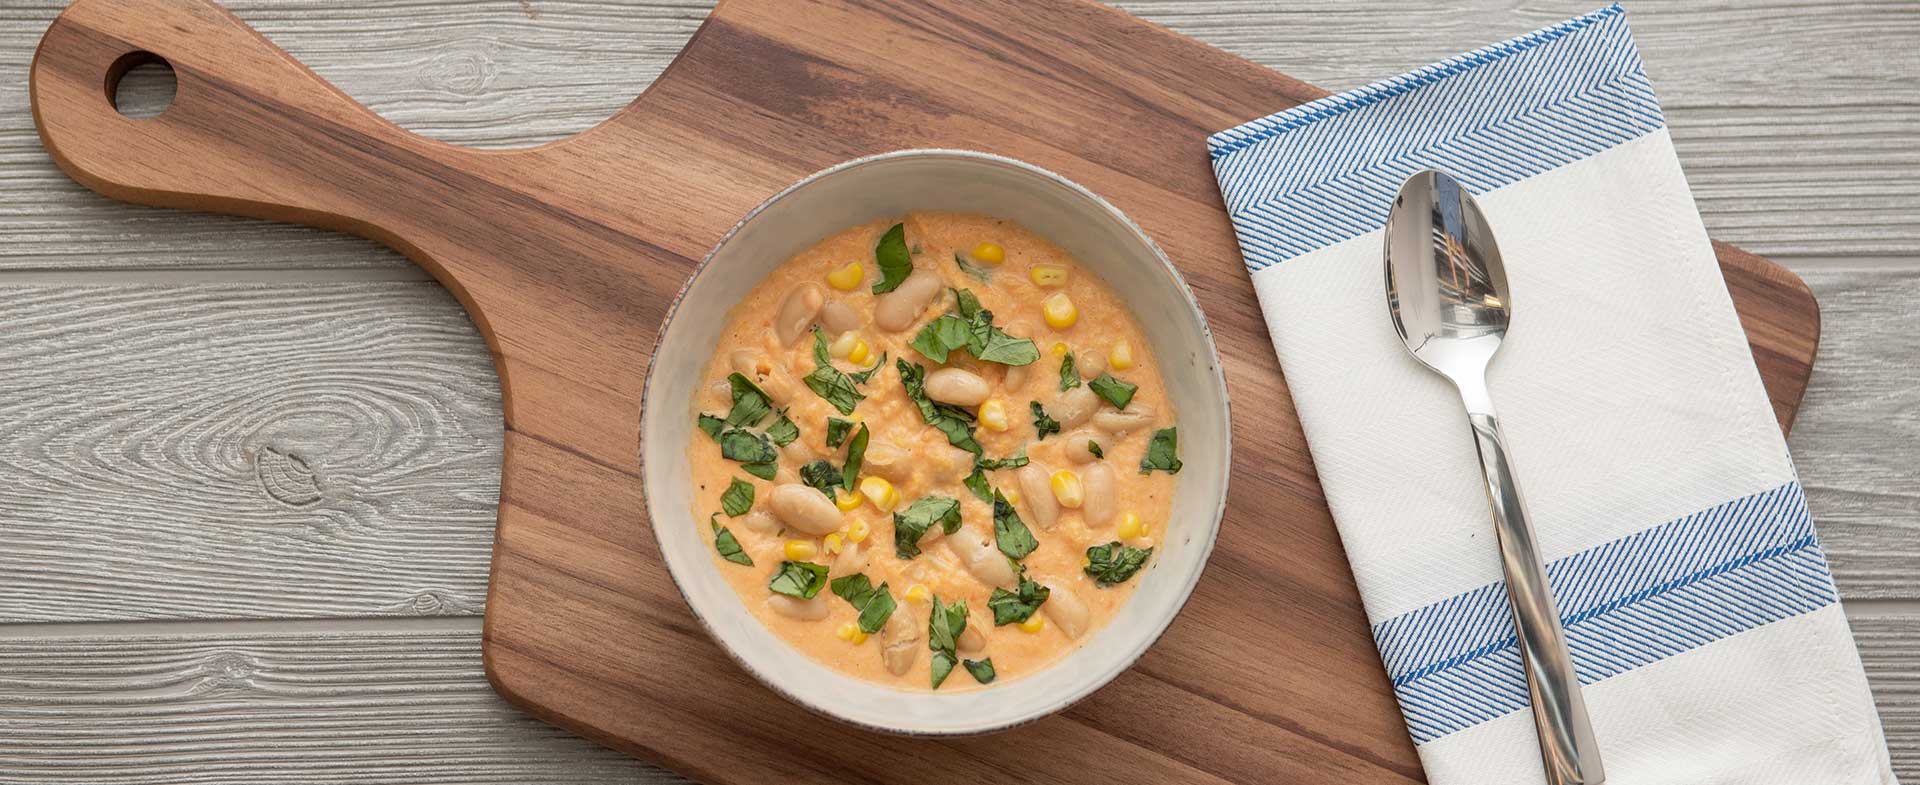 Creamy Tomato and Corn Soup with White Beans Recipe